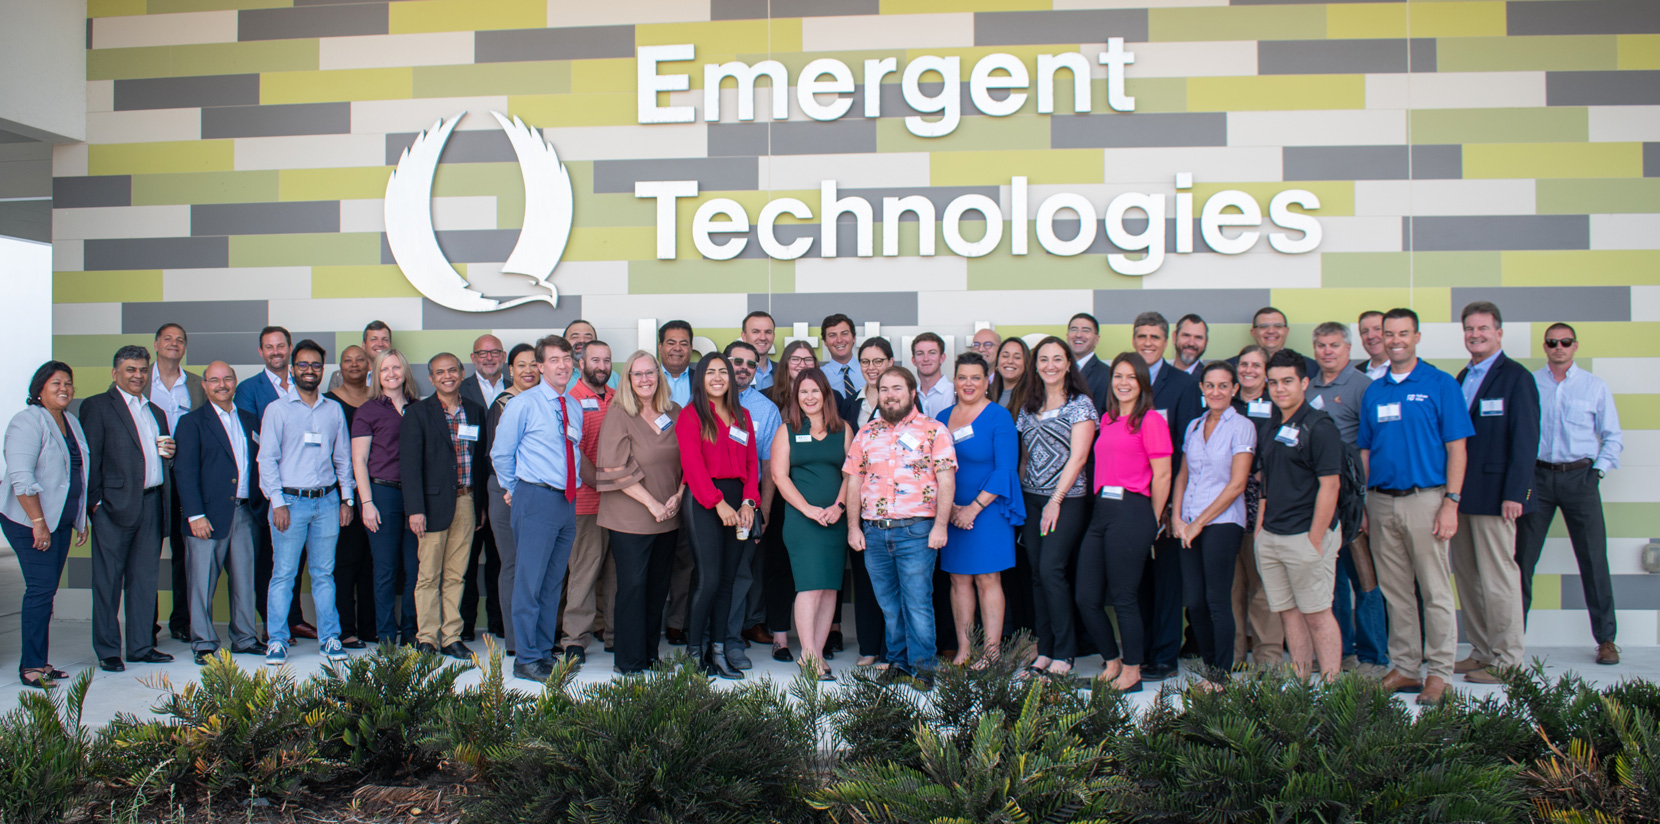 Supply Chain Forum of SWFL Spring 2022 attendees outside of the Emergent Technologies Institute (ETI)